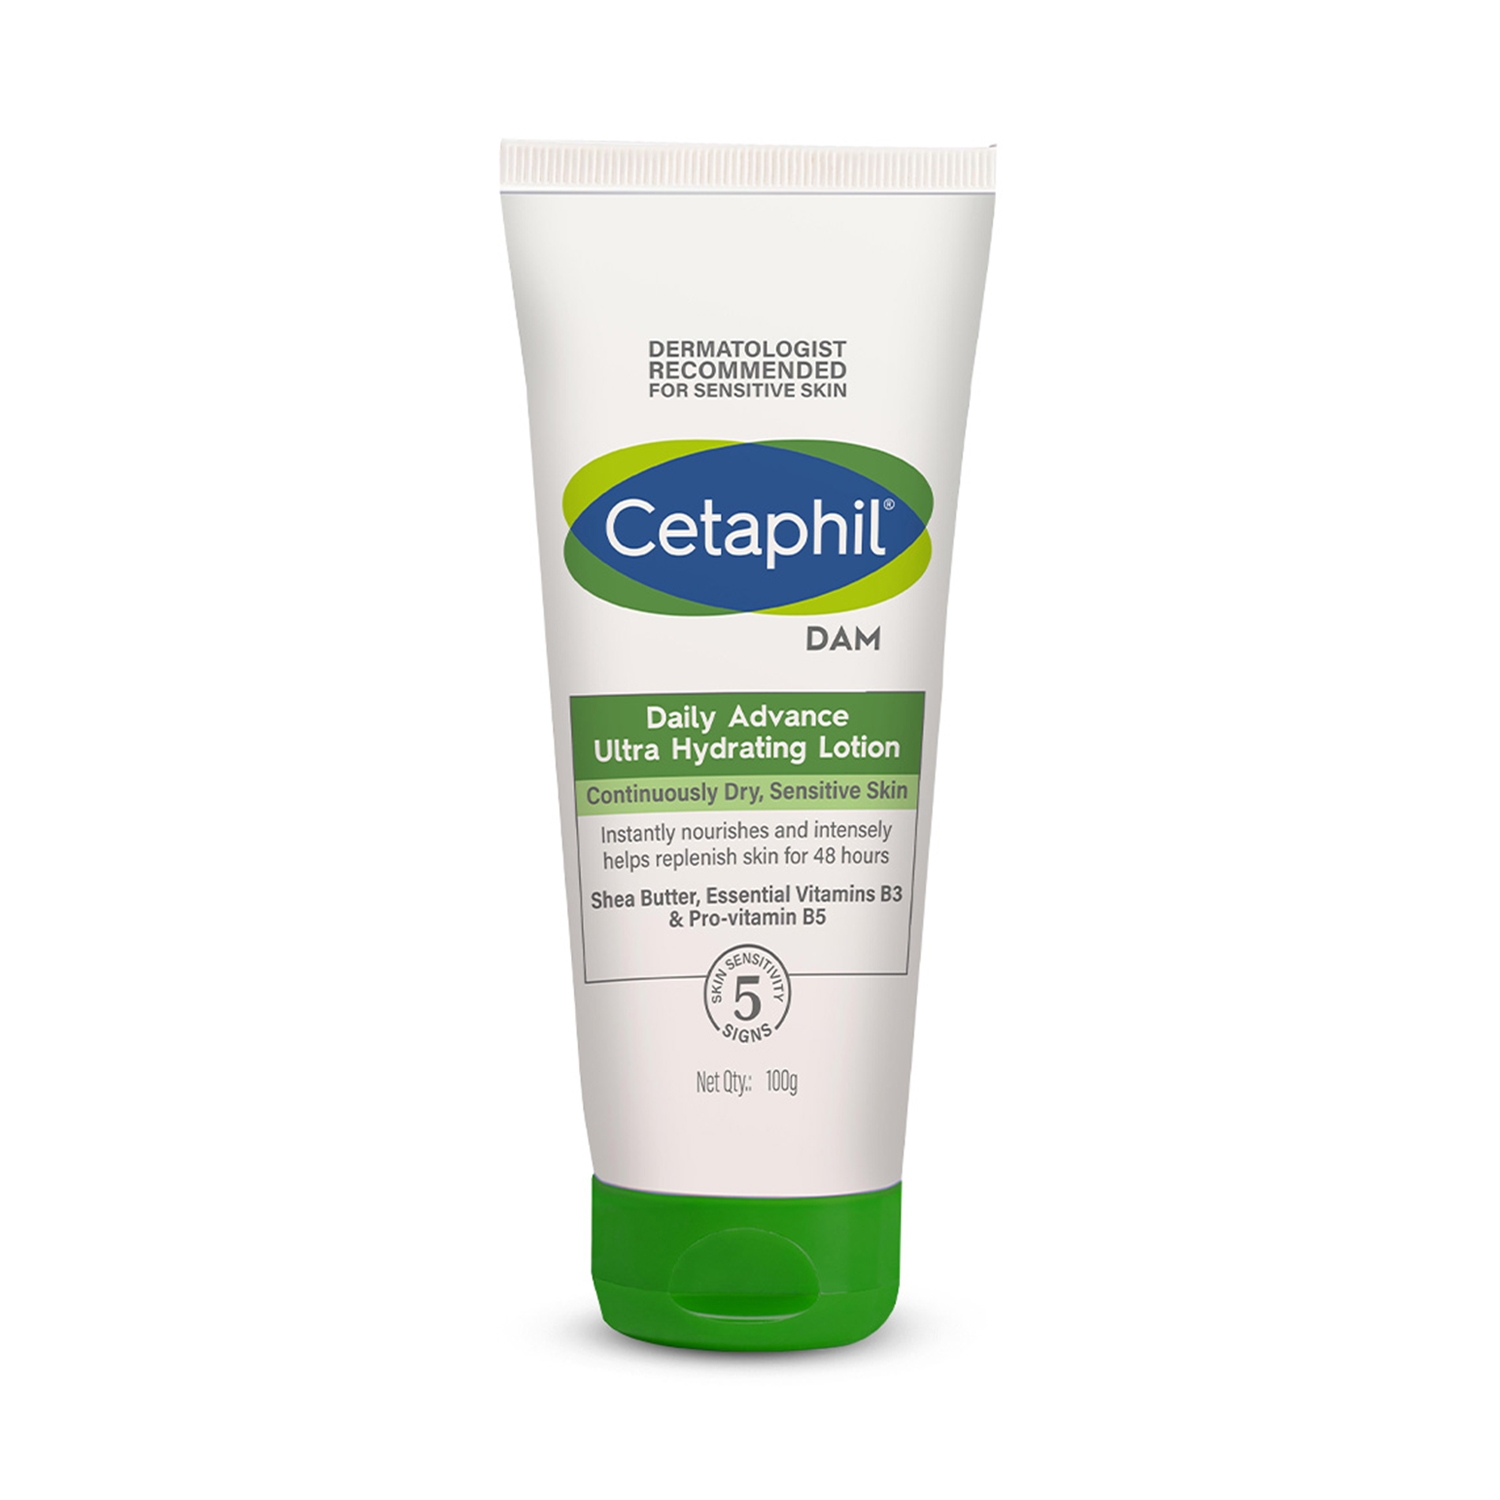 Cetaphil | Cetaphil Daily Advance Ultra Hydrating Lotion (100g)